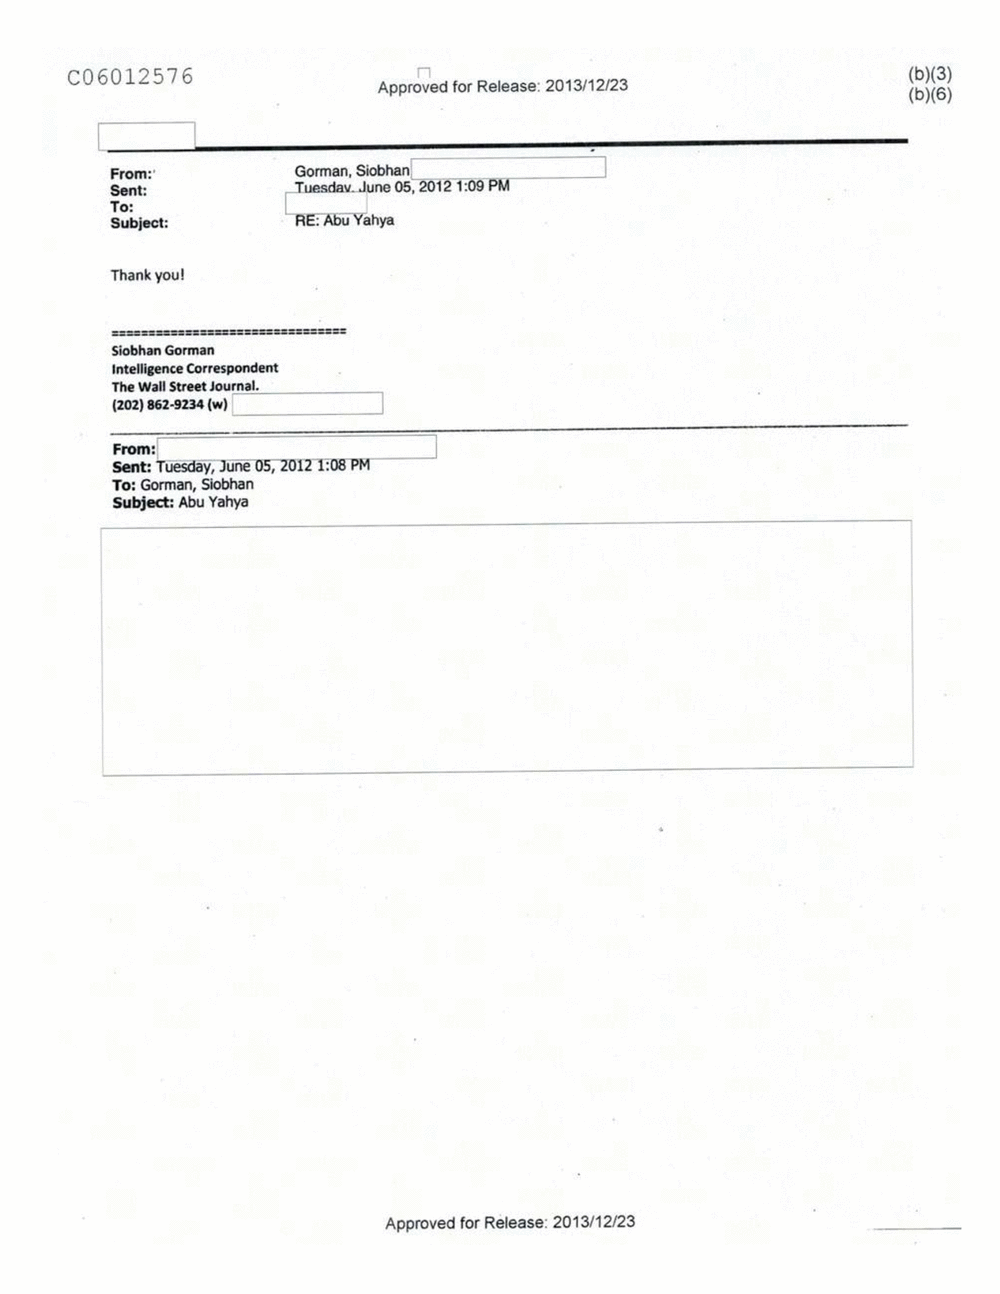 Page 111 from Email Correspondence Between Reporters and CIA Flacks